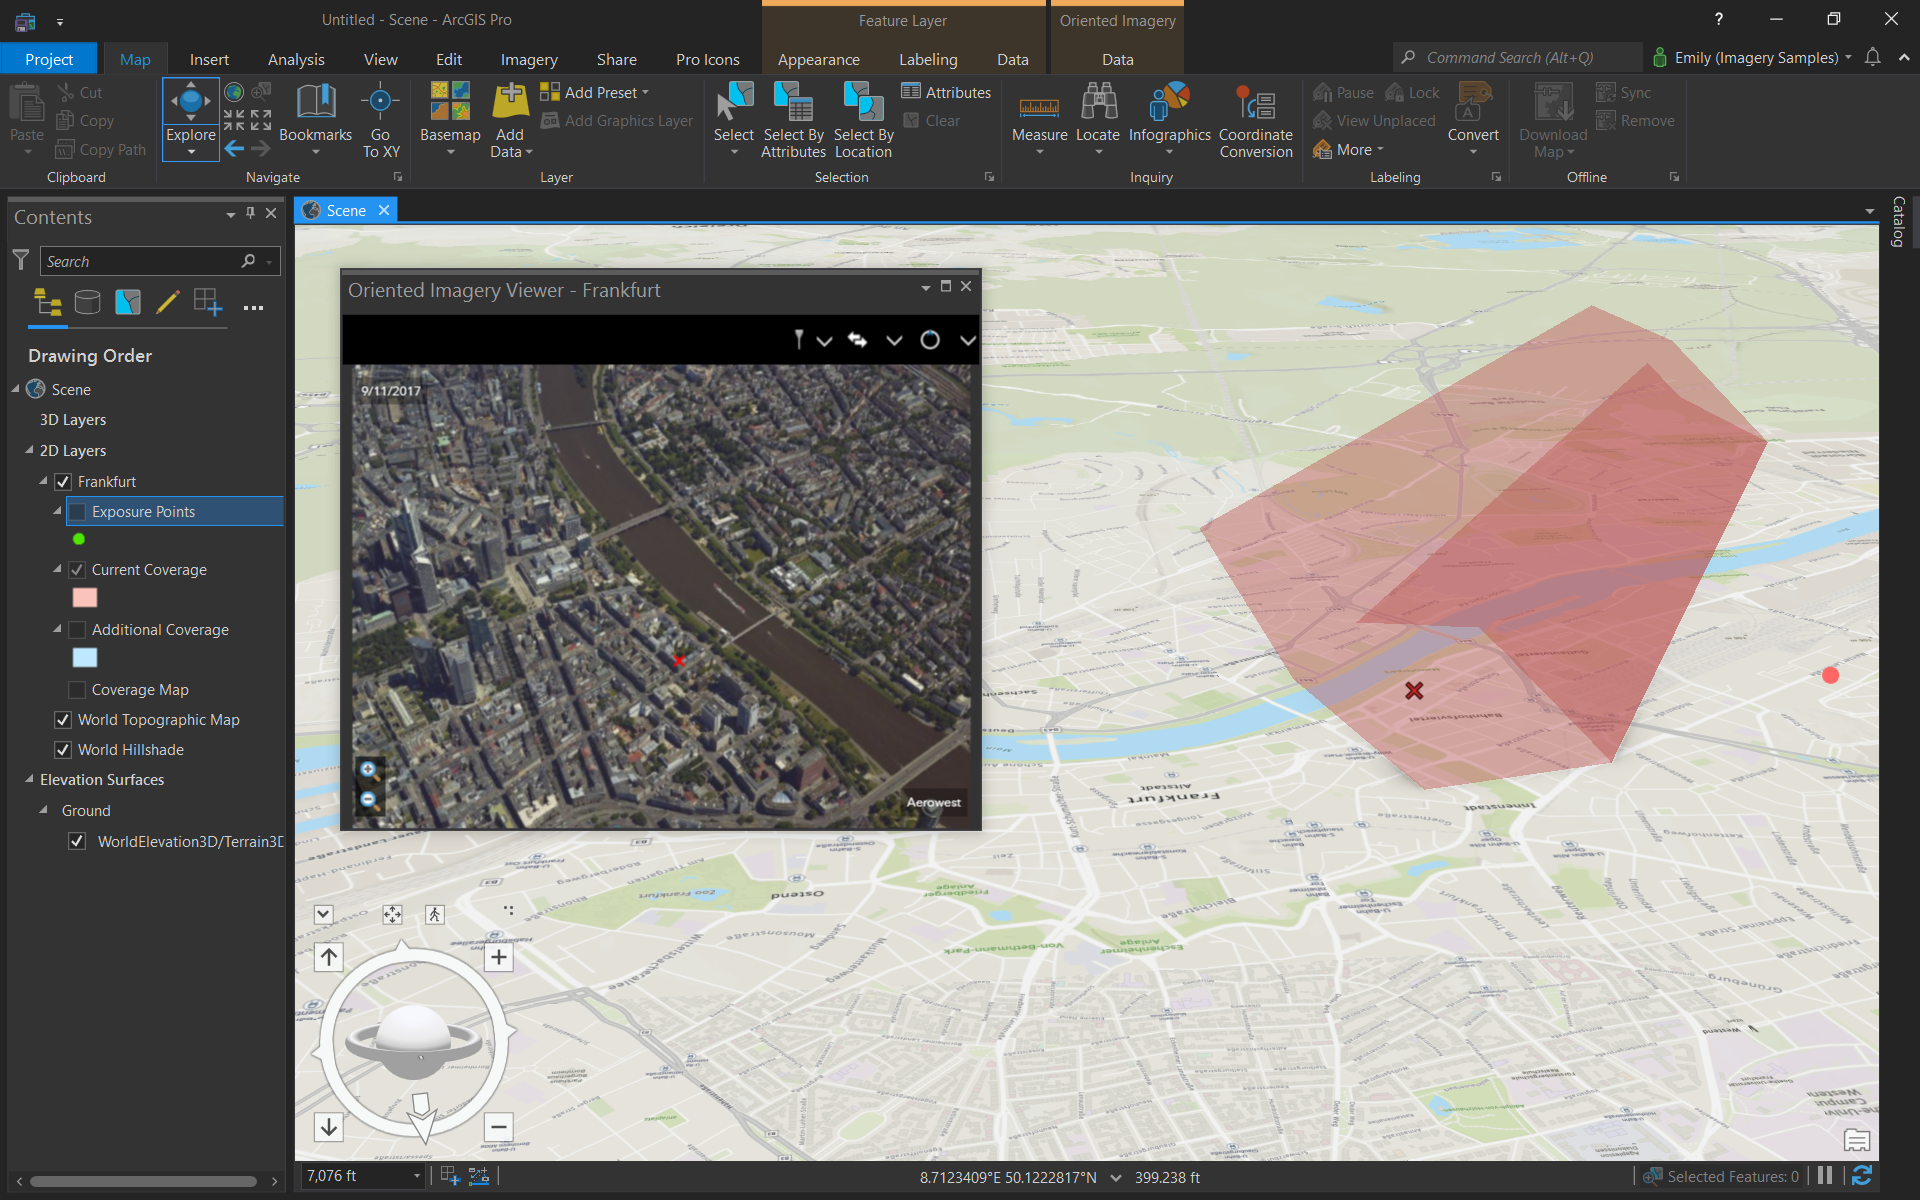 Screenshot of Oriented Imagery add-in for ArcGIS Pro in dark mode with a frustum